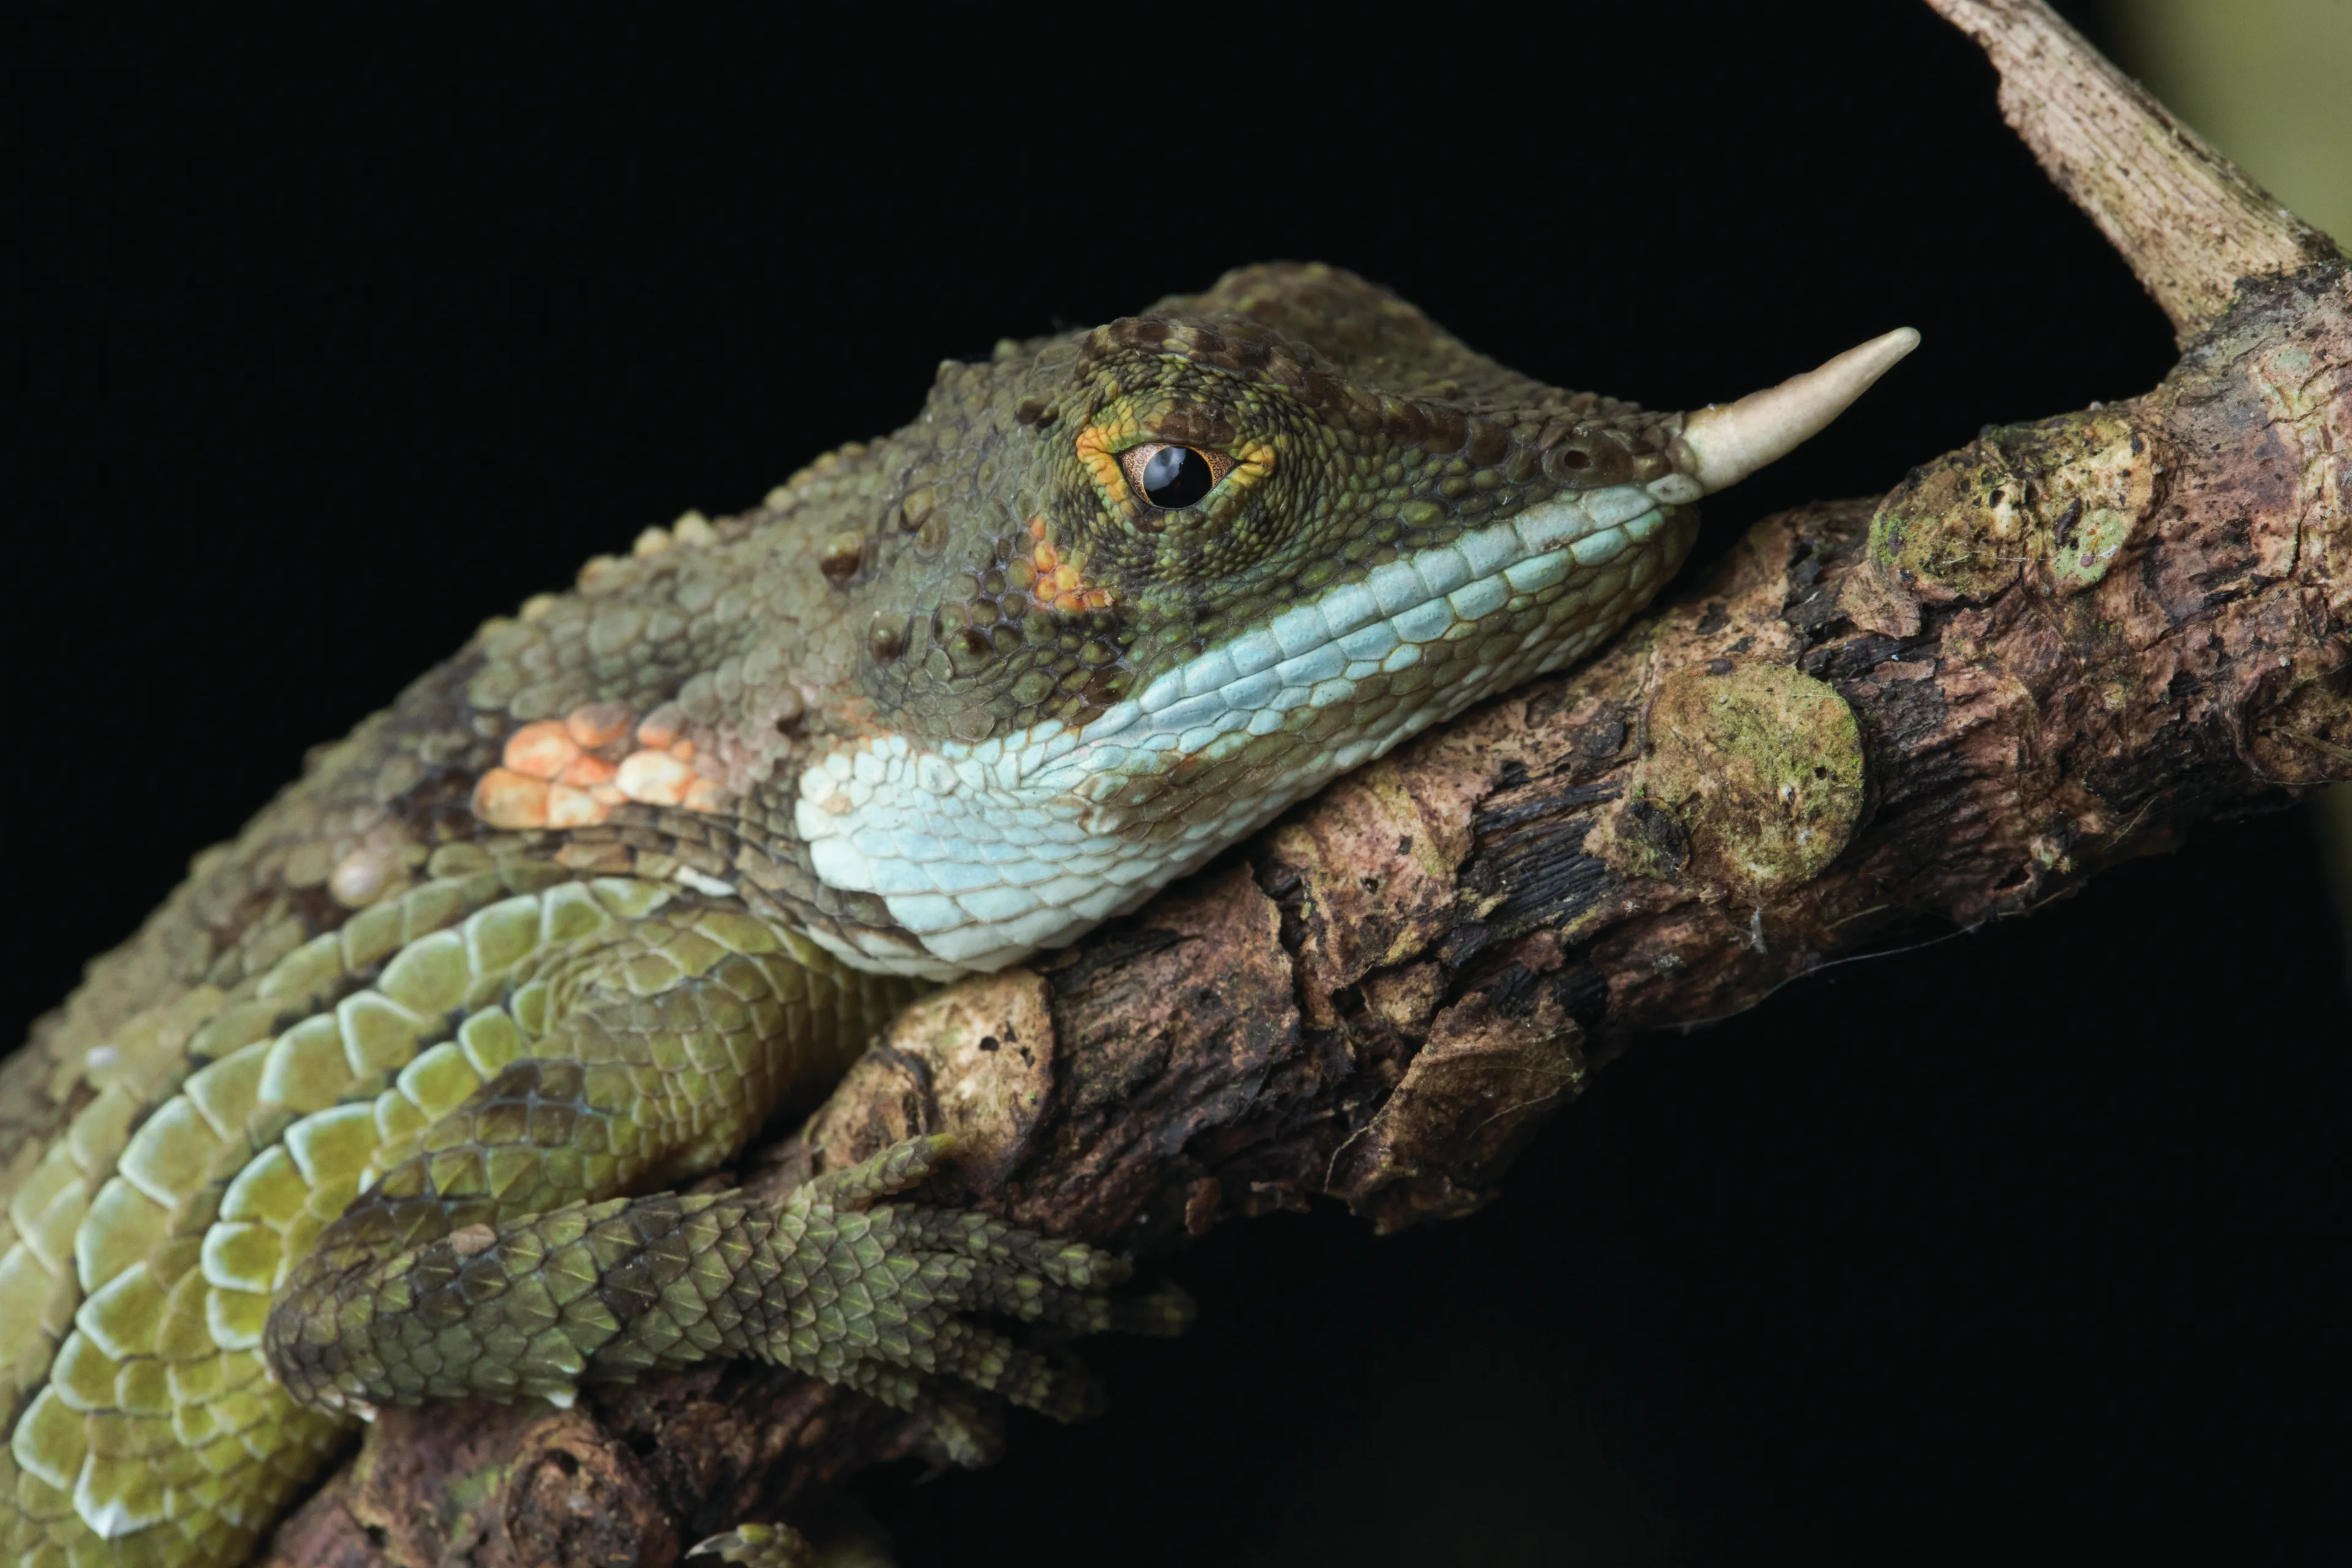 Close up of a reptile from Dilmah Conservation